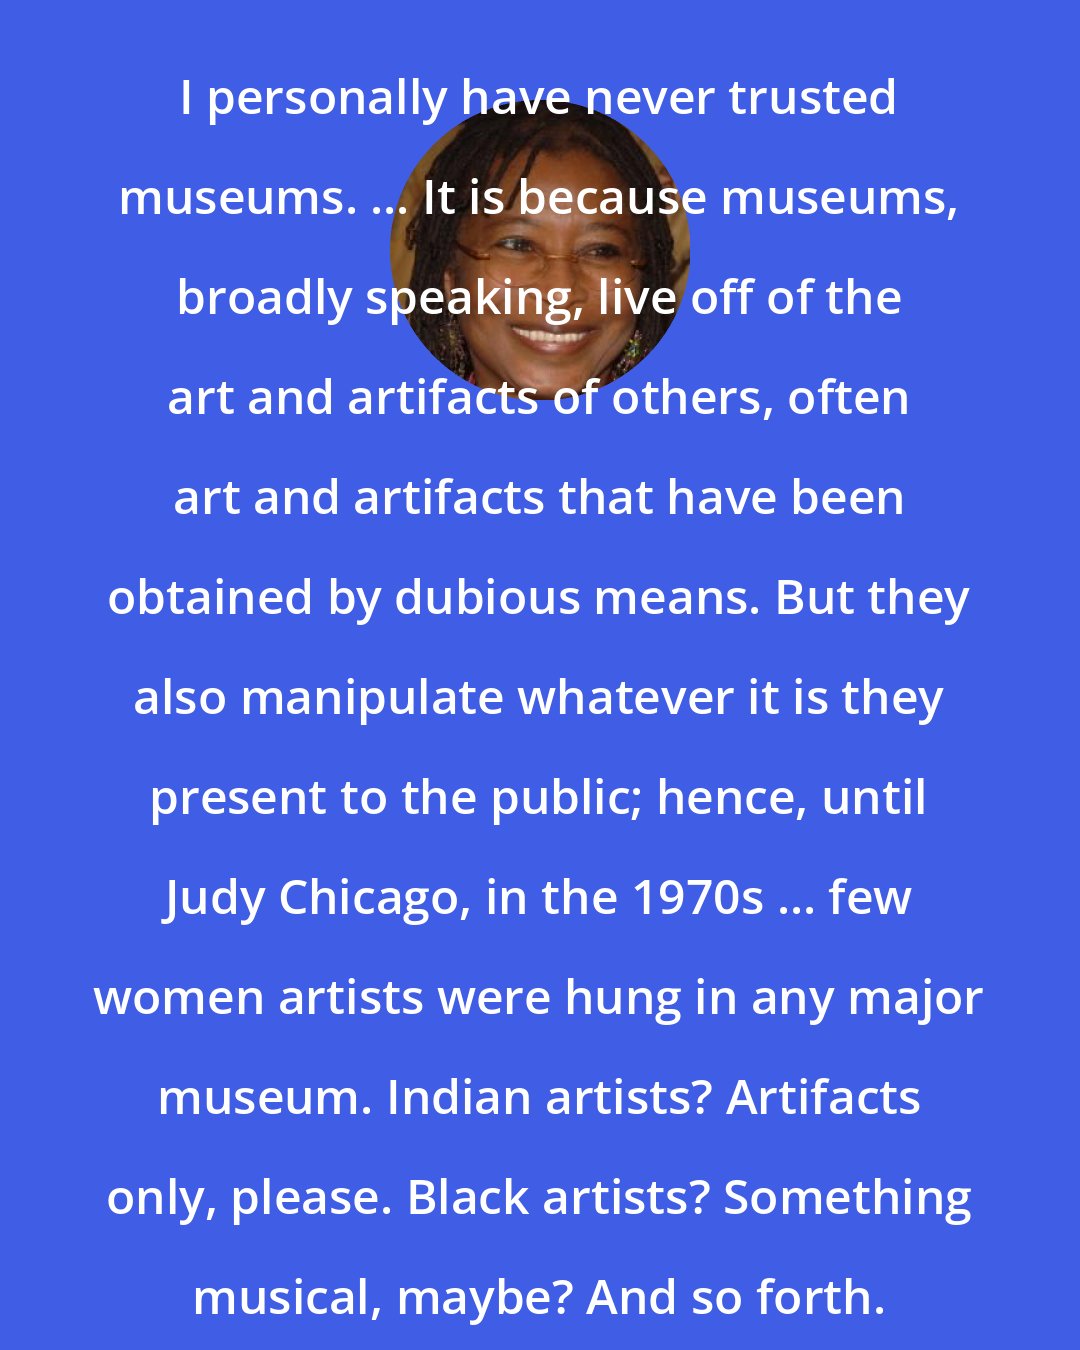 Alice Walker: I personally have never trusted museums. ... It is because museums, broadly speaking, live off of the art and artifacts of others, often art and artifacts that have been obtained by dubious means. But they also manipulate whatever it is they present to the public; hence, until Judy Chicago, in the 1970s ... few women artists were hung in any major museum. Indian artists? Artifacts only, please. Black artists? Something musical, maybe? And so forth.